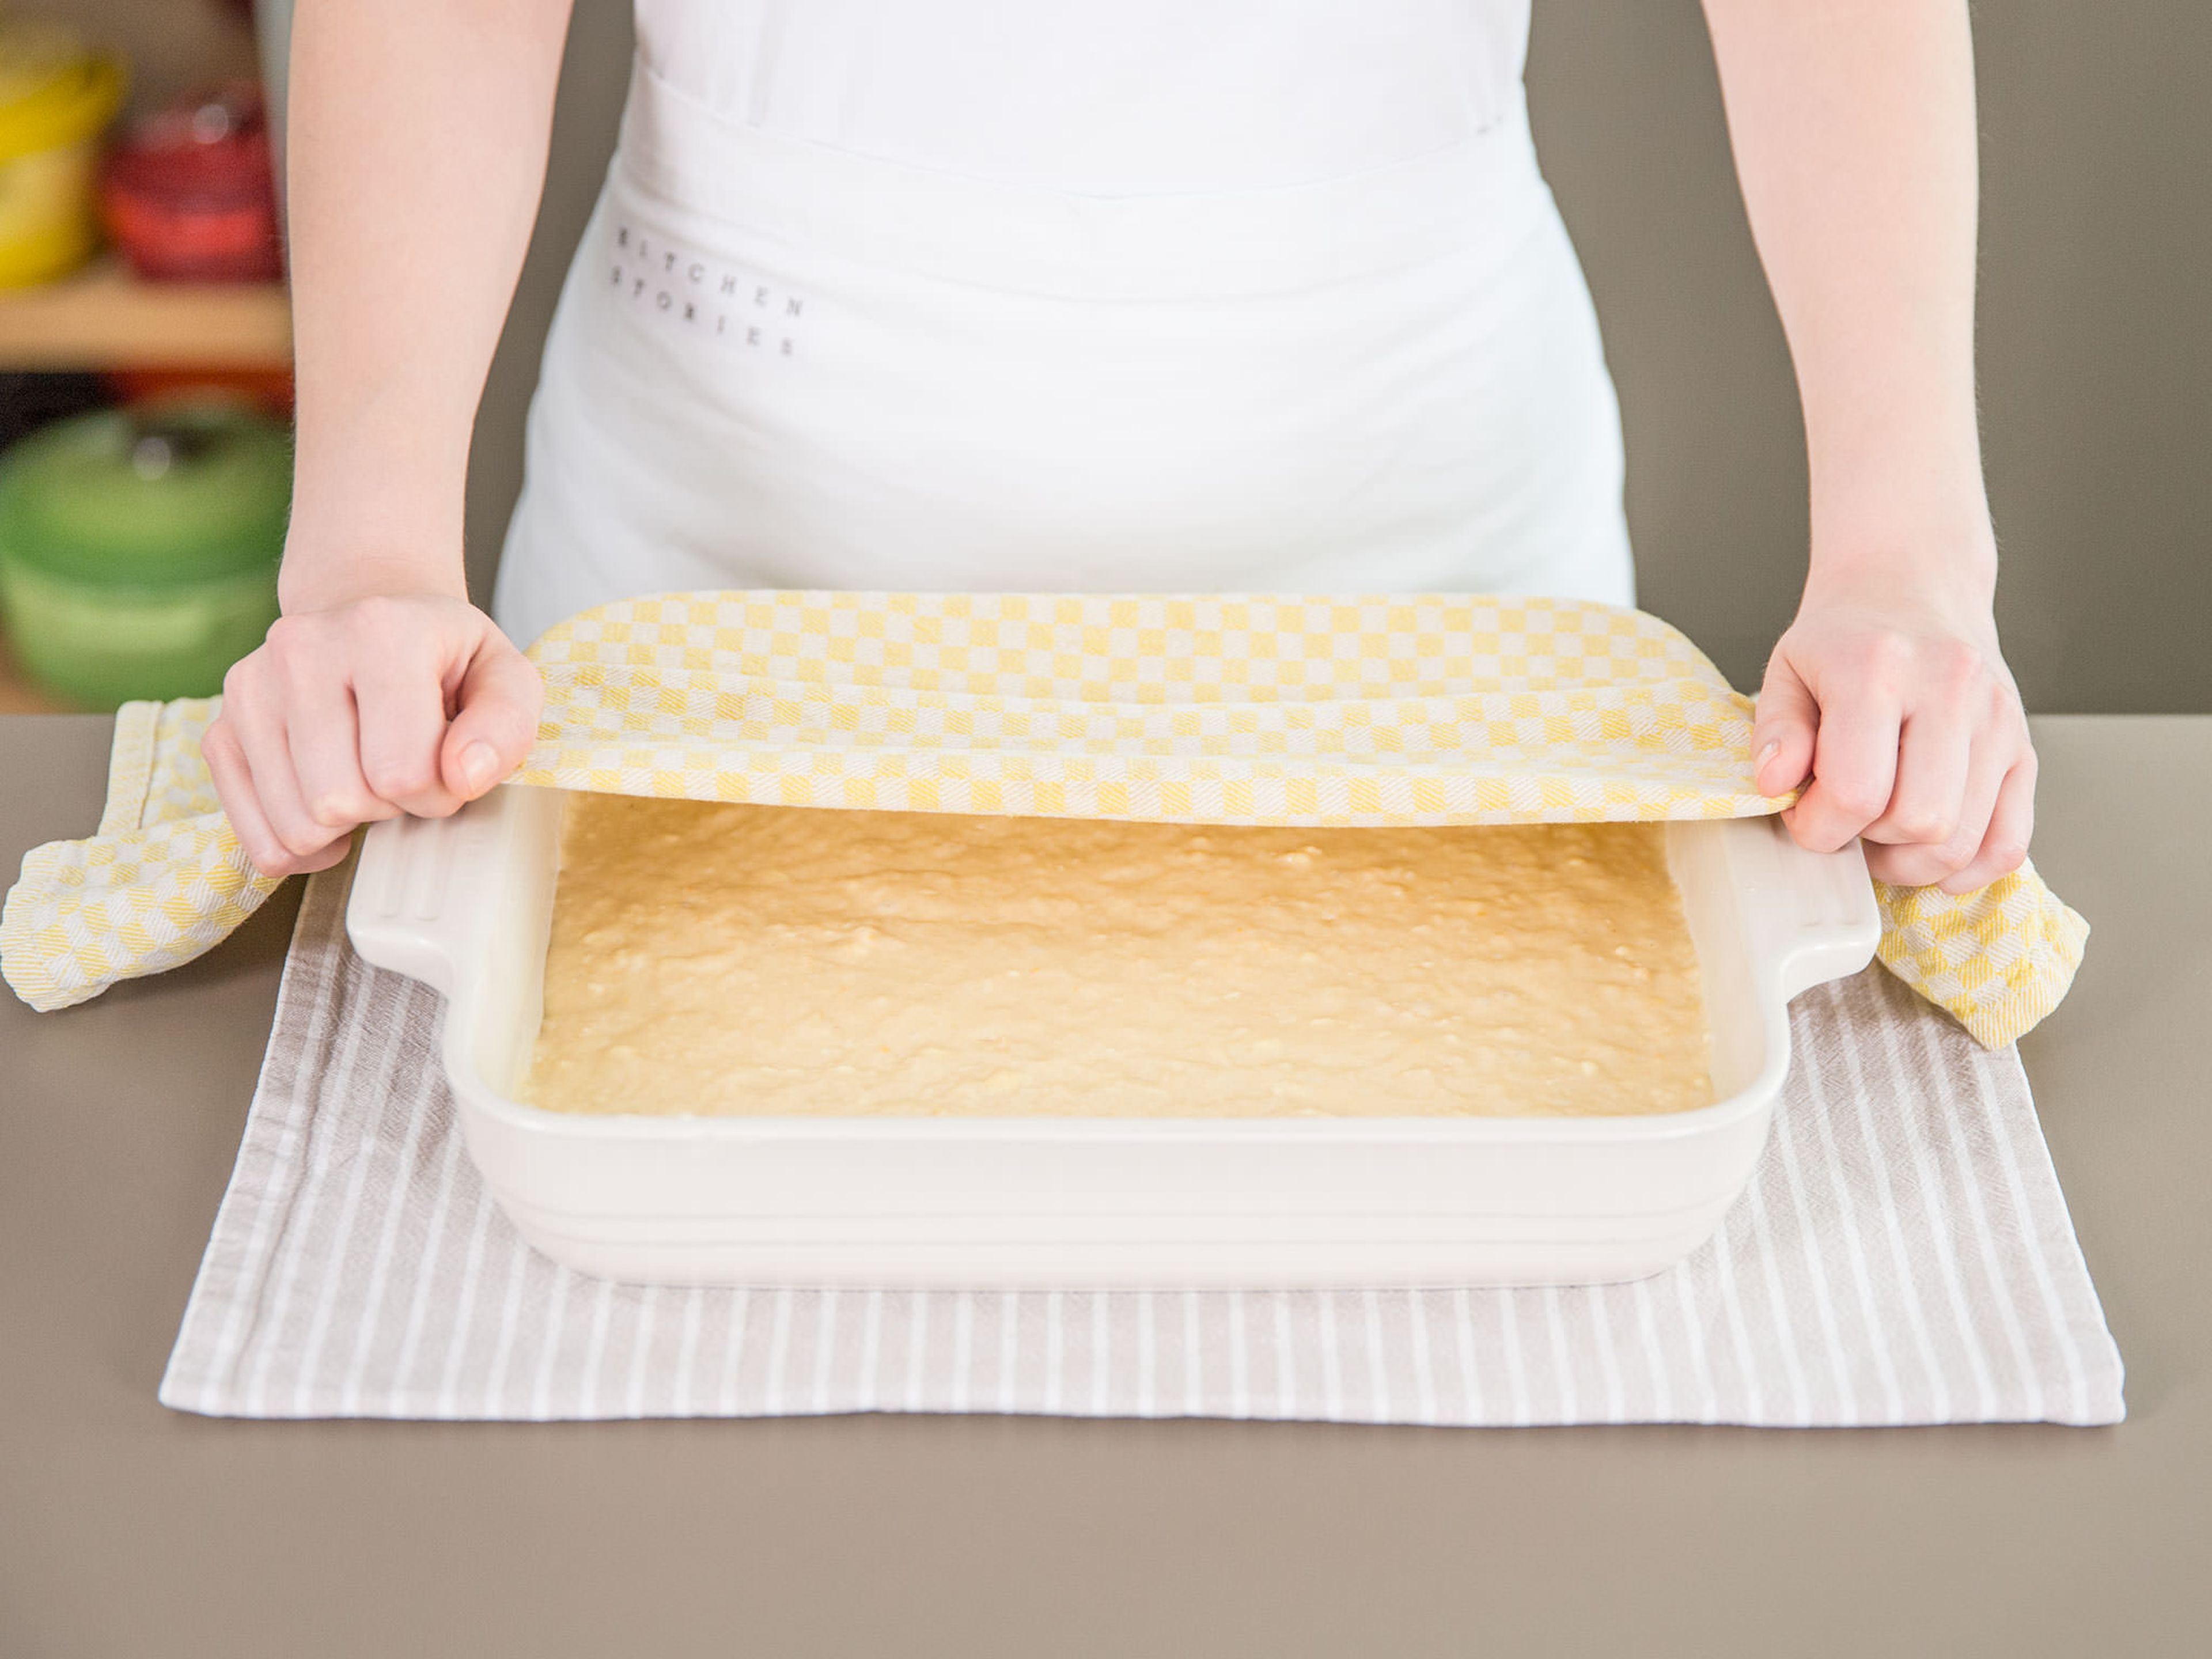 Once dough has almost doubled in size, give it a gentle stir to deflate slightly, then transfer to baking dish and spread to cover the bottom evenly. Cover loosely with plastic wrap or a damp towel and set aside to rise for approx. 30 – 45 min. Preheat the oven to 175°C/350°F. When the cake is ready, bake it for approx. 25 min., or until it starts to turn golden brown on top and the center is just set.